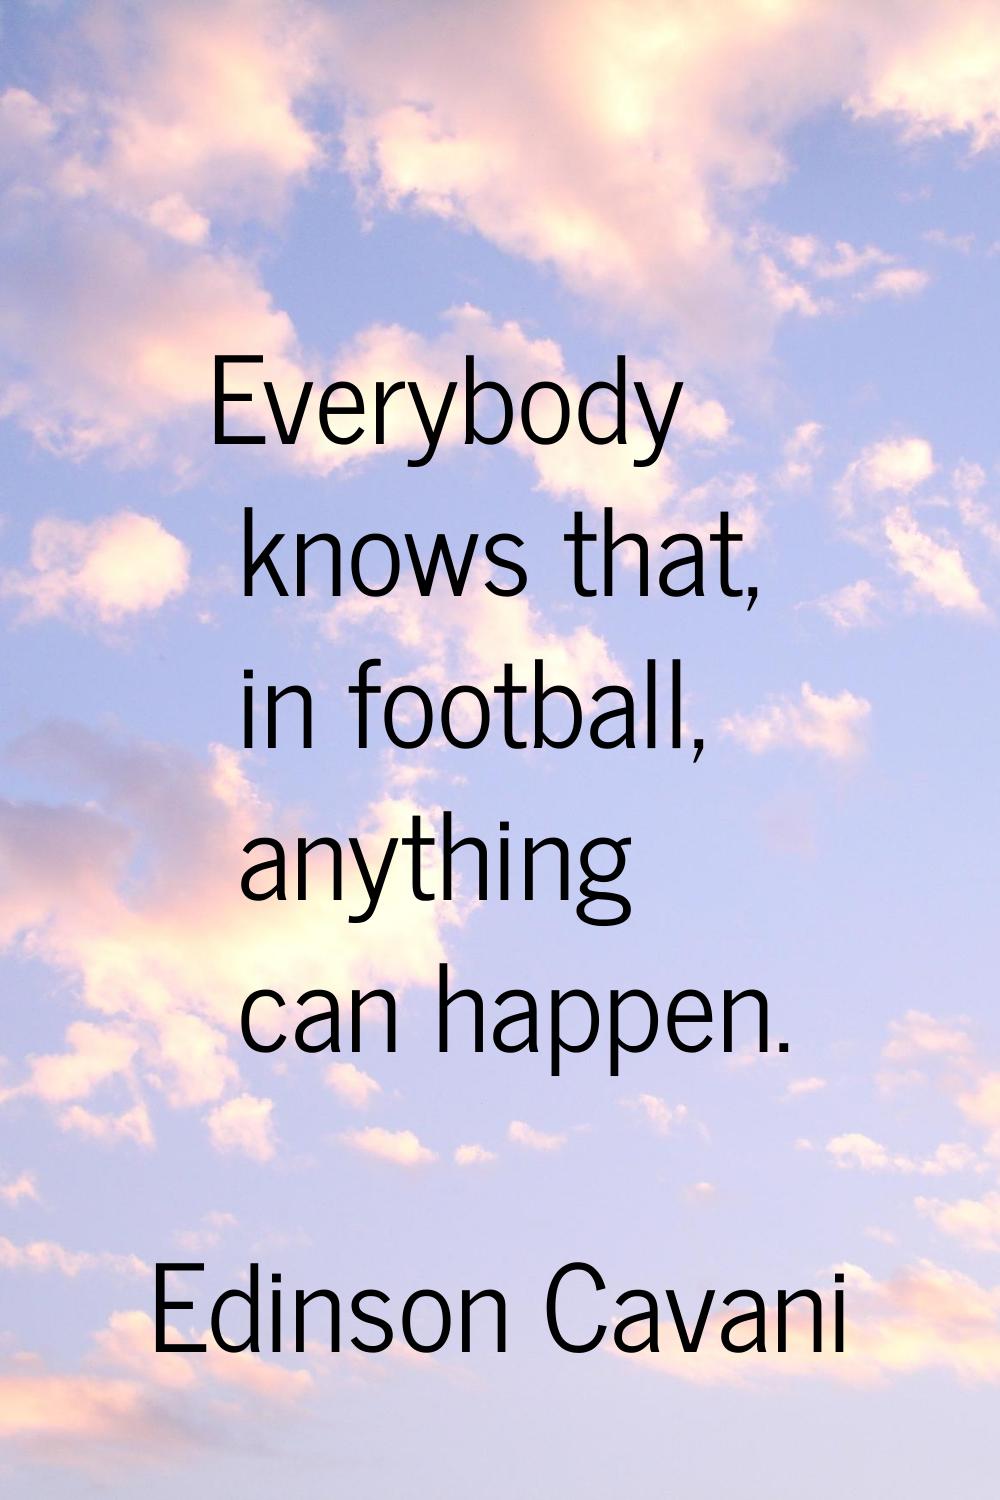 Everybody knows that, in football, anything can happen.